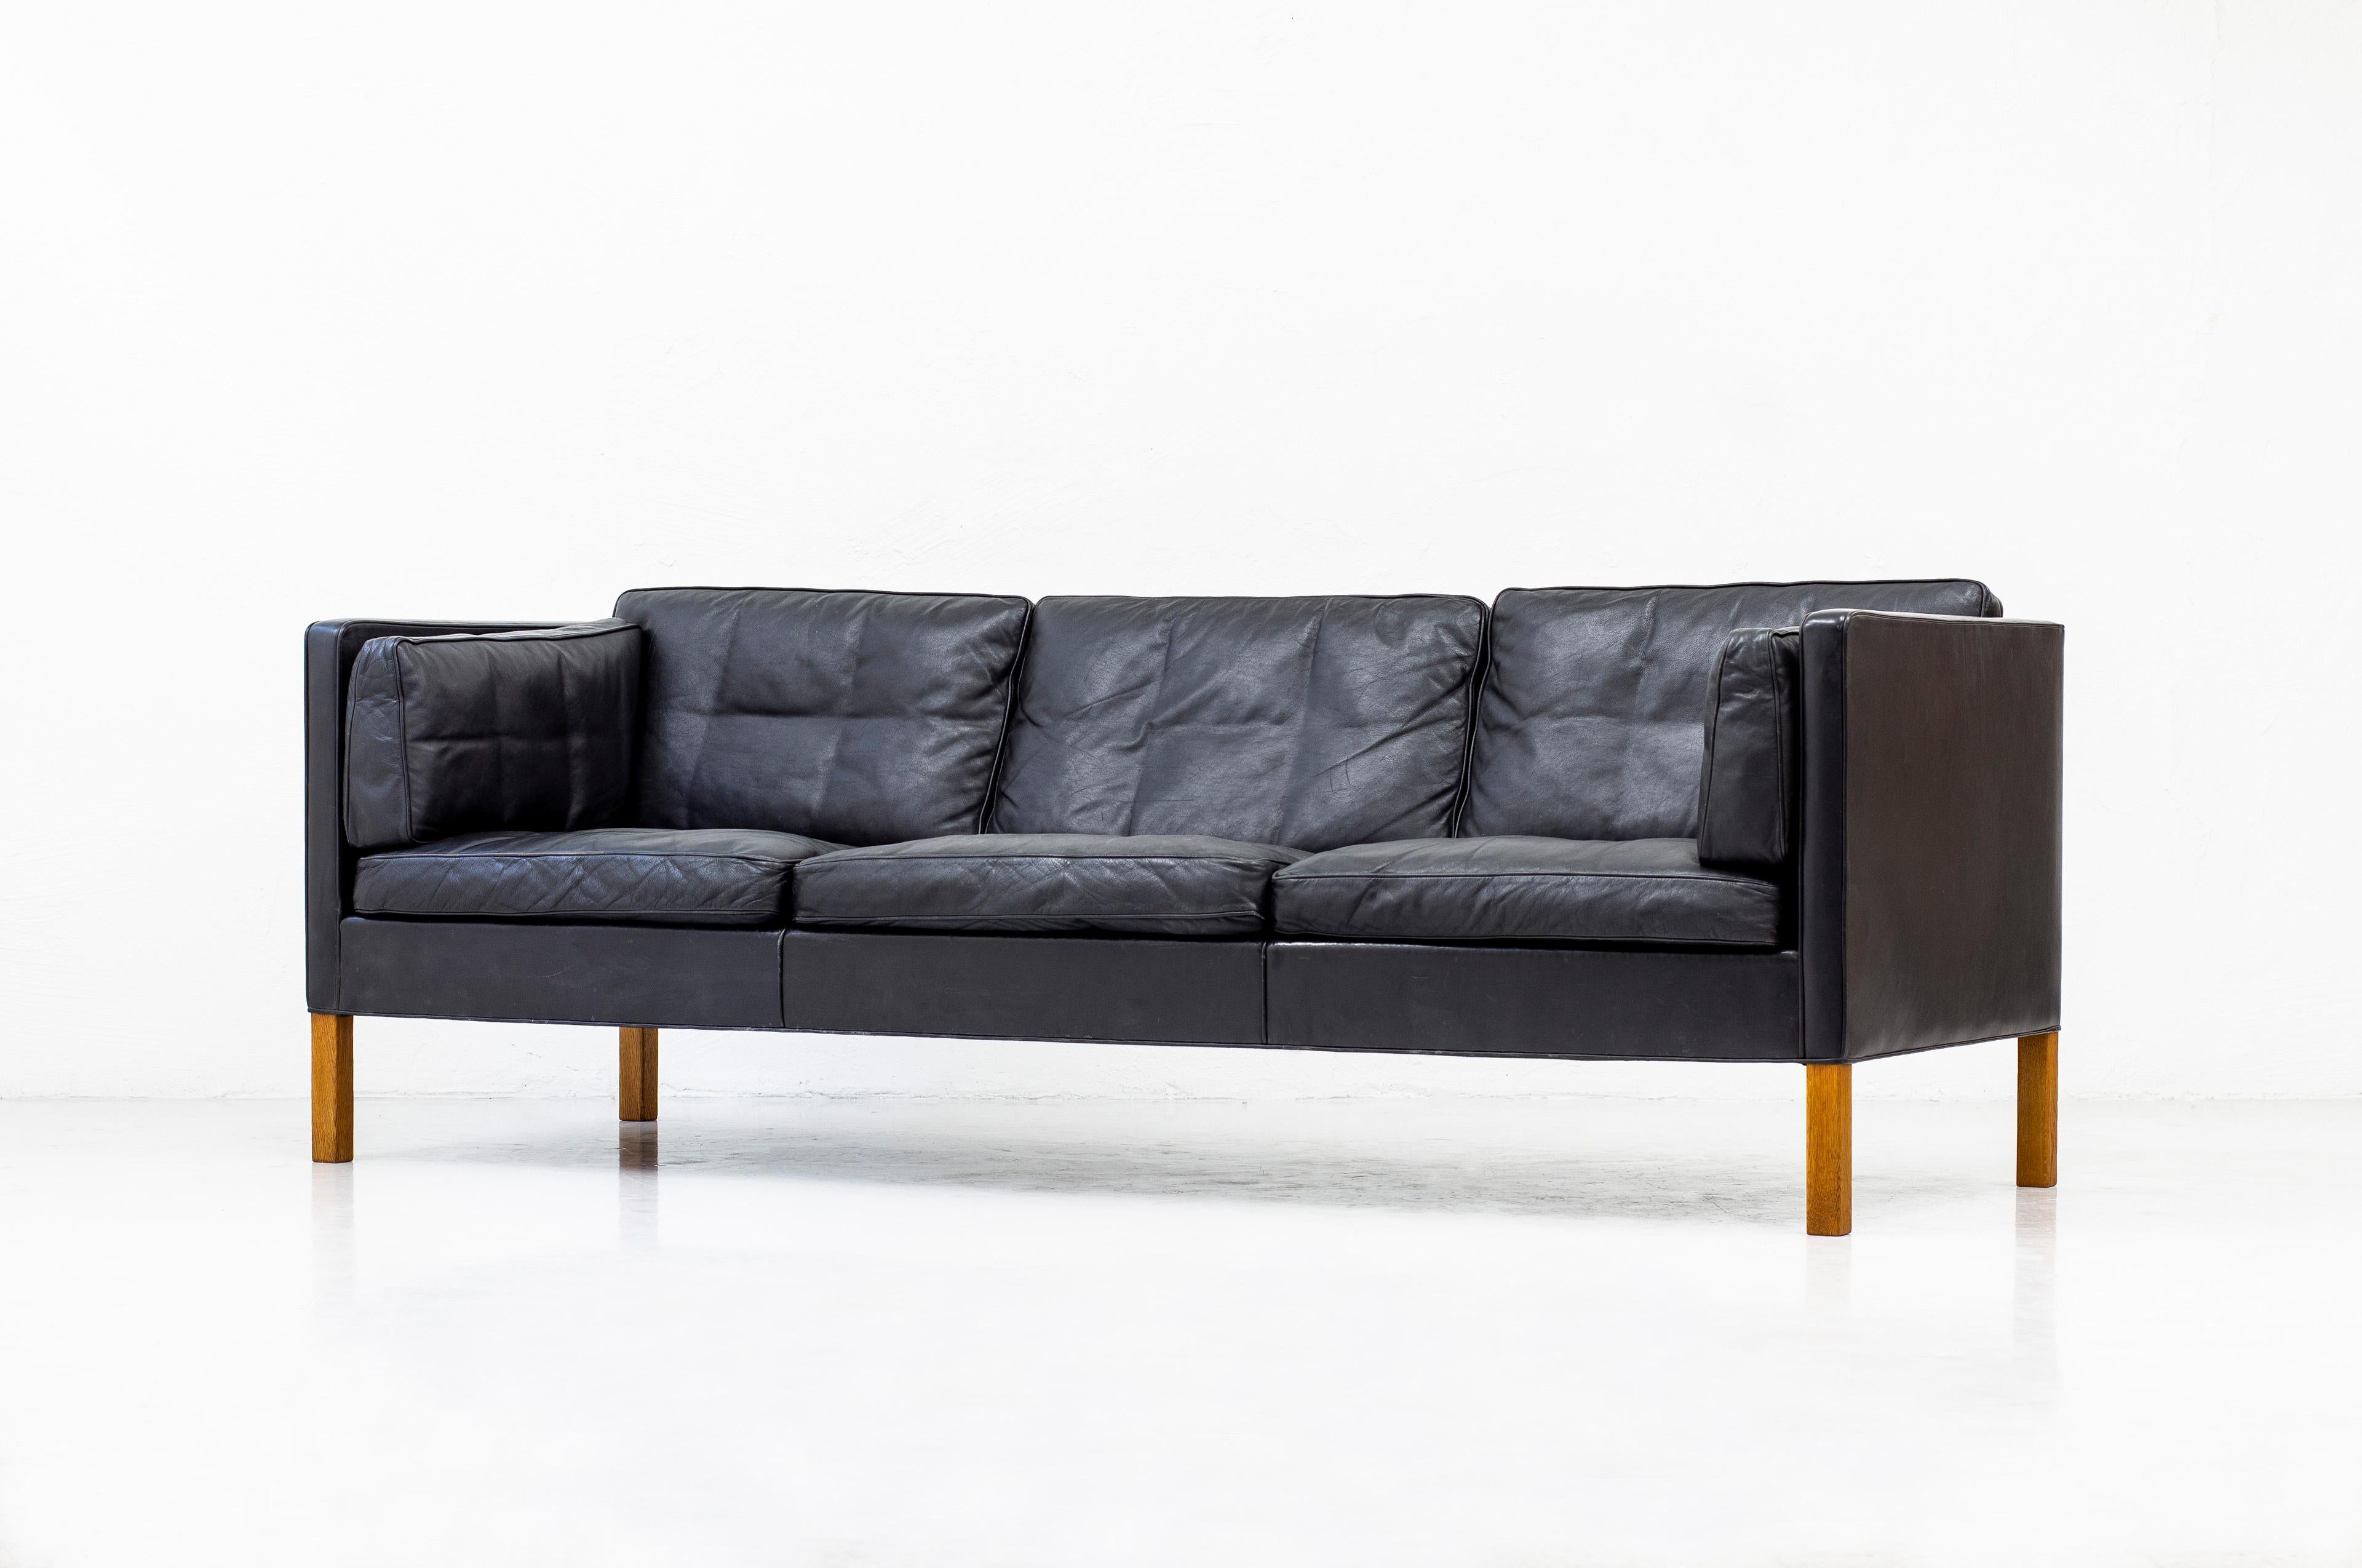 Sofa model 2443 designed by Børge Mogensen. Designed in 1975 and produced by Fredericia Furniture in Denmark. This example ca late 1970s. Black original leather and solid oak legs. Down feather filled cushions. Very good vintage condition with age